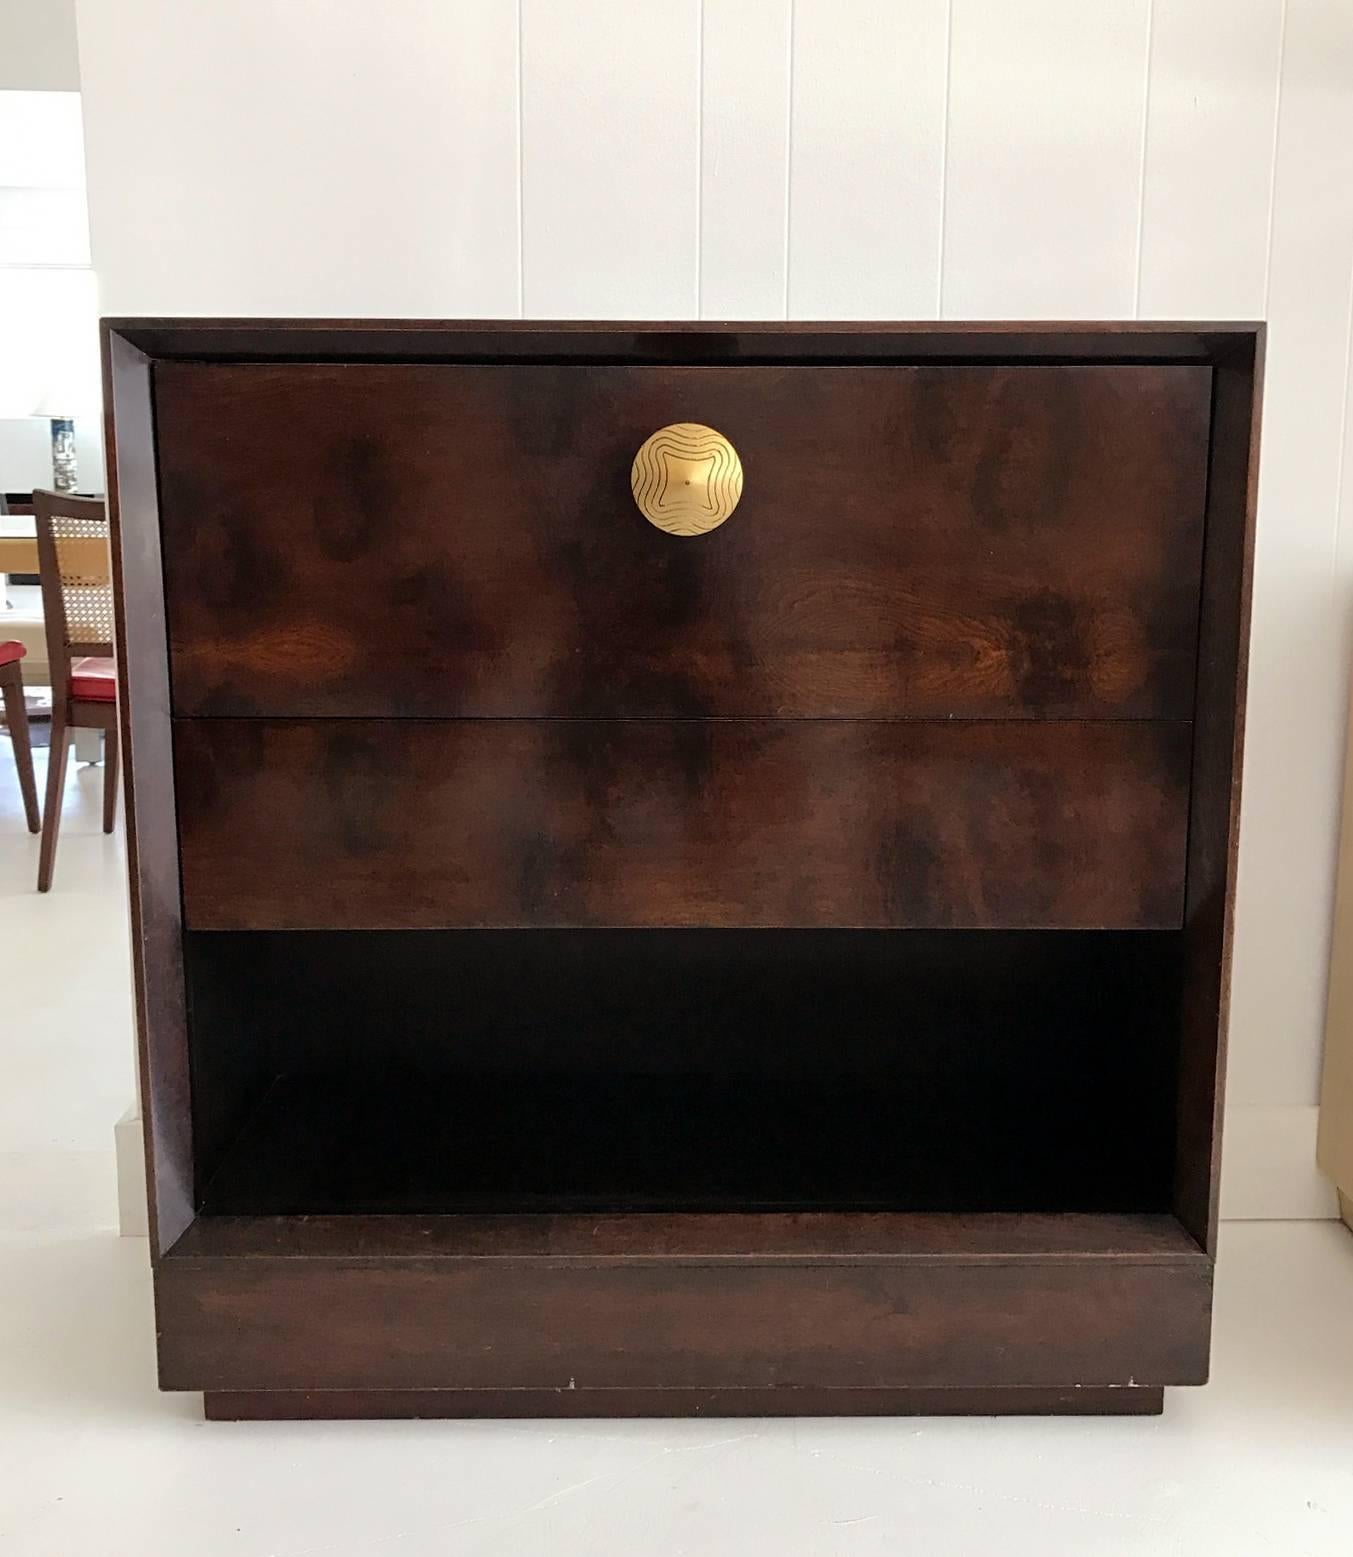 Art Deco transiting to Streamline modern drop front desk/secretary designed by Gilbert Rohde in 1940s and manufactured by Herman Miller. Exotic paldao veneer. It has a draw and a drop front desk with fitted interior.
The knob on the front of the